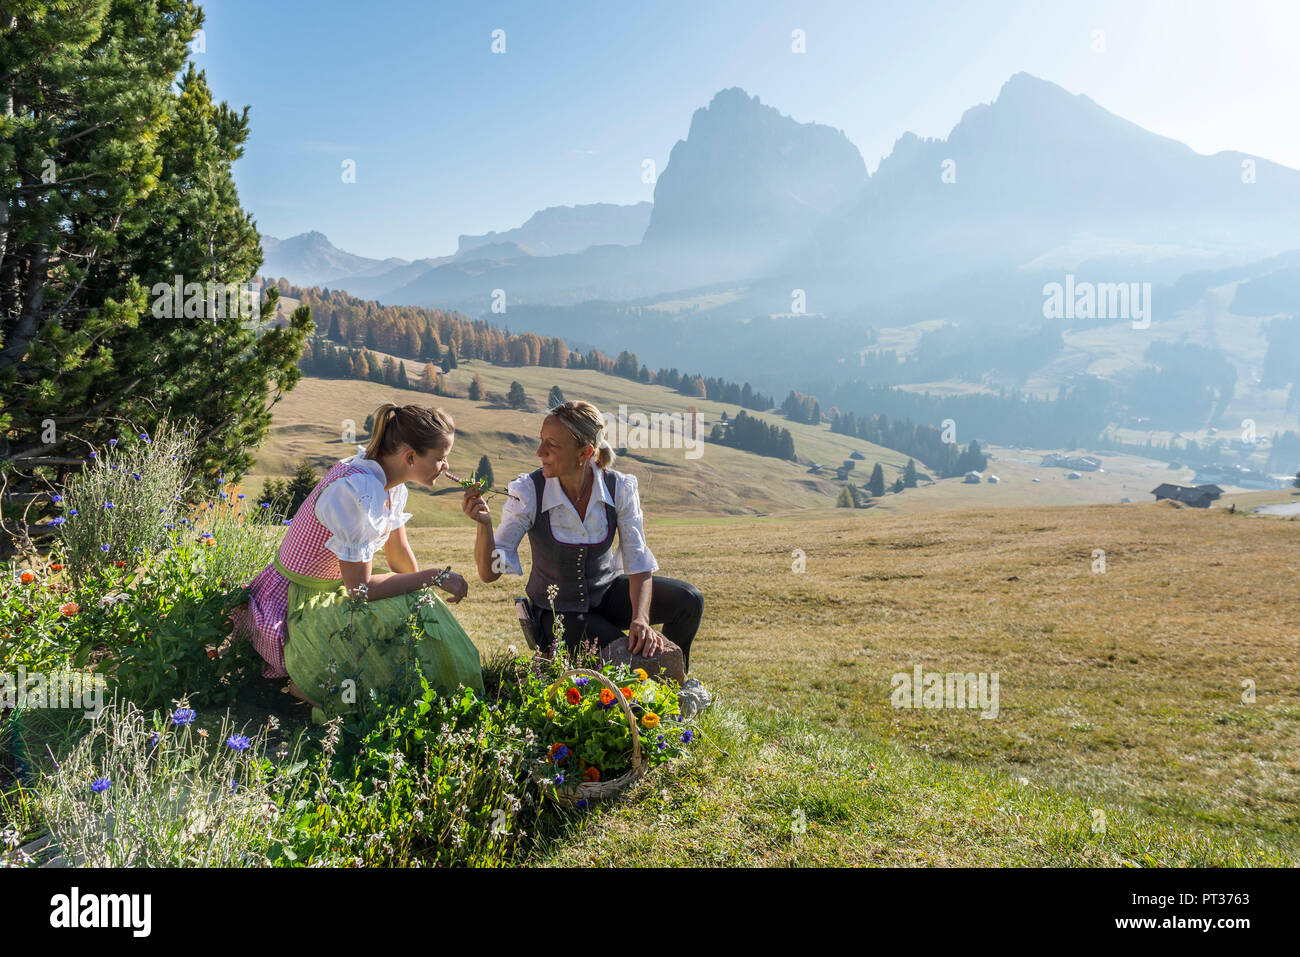 Helga and Maria Lageder with flower basket, Seiser Alm, near Castelrotto, Dolomites, South Tyrol, Italy Stock Photo